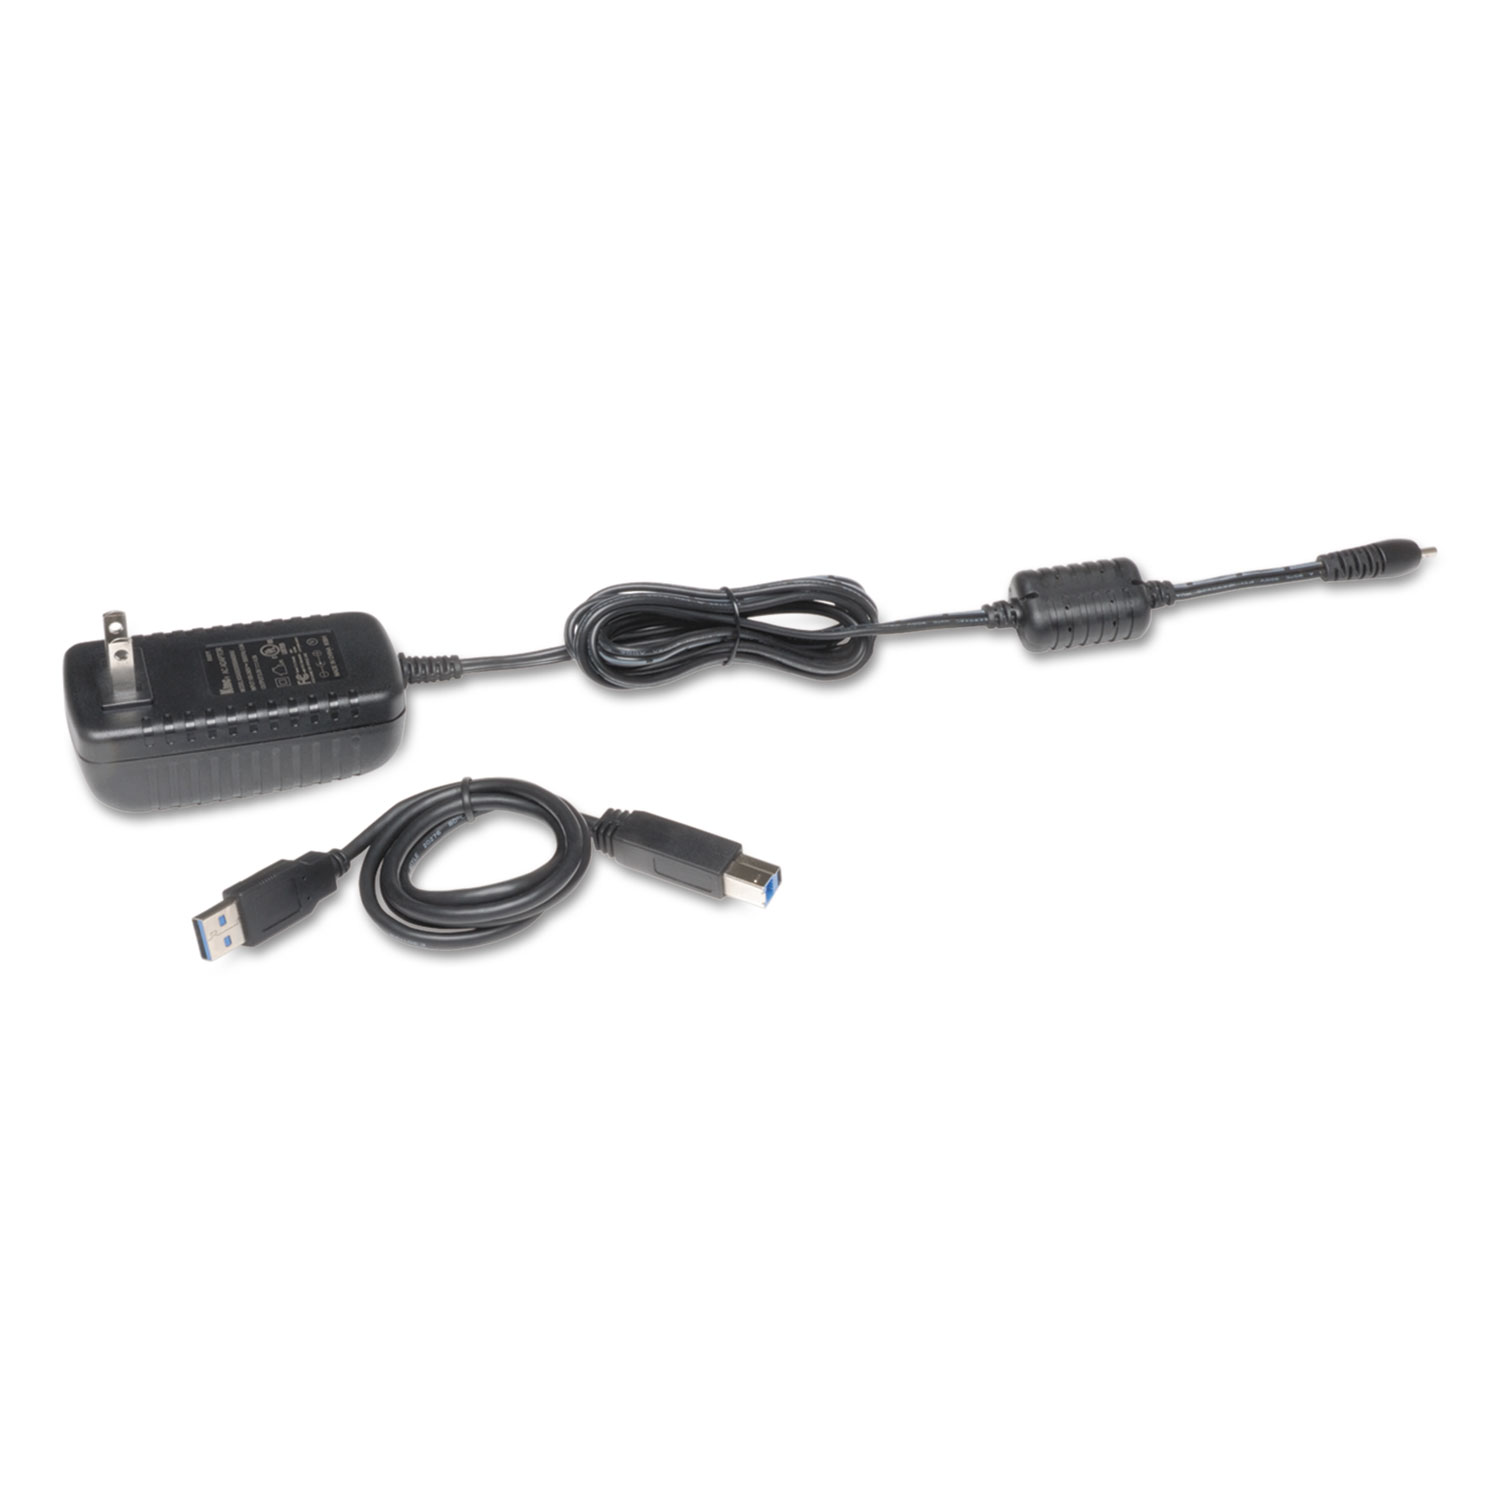 Tripp Lite U428-003 3' USB 3.1 Type C to USB 3.0 Type A Cable - image 2 of 8